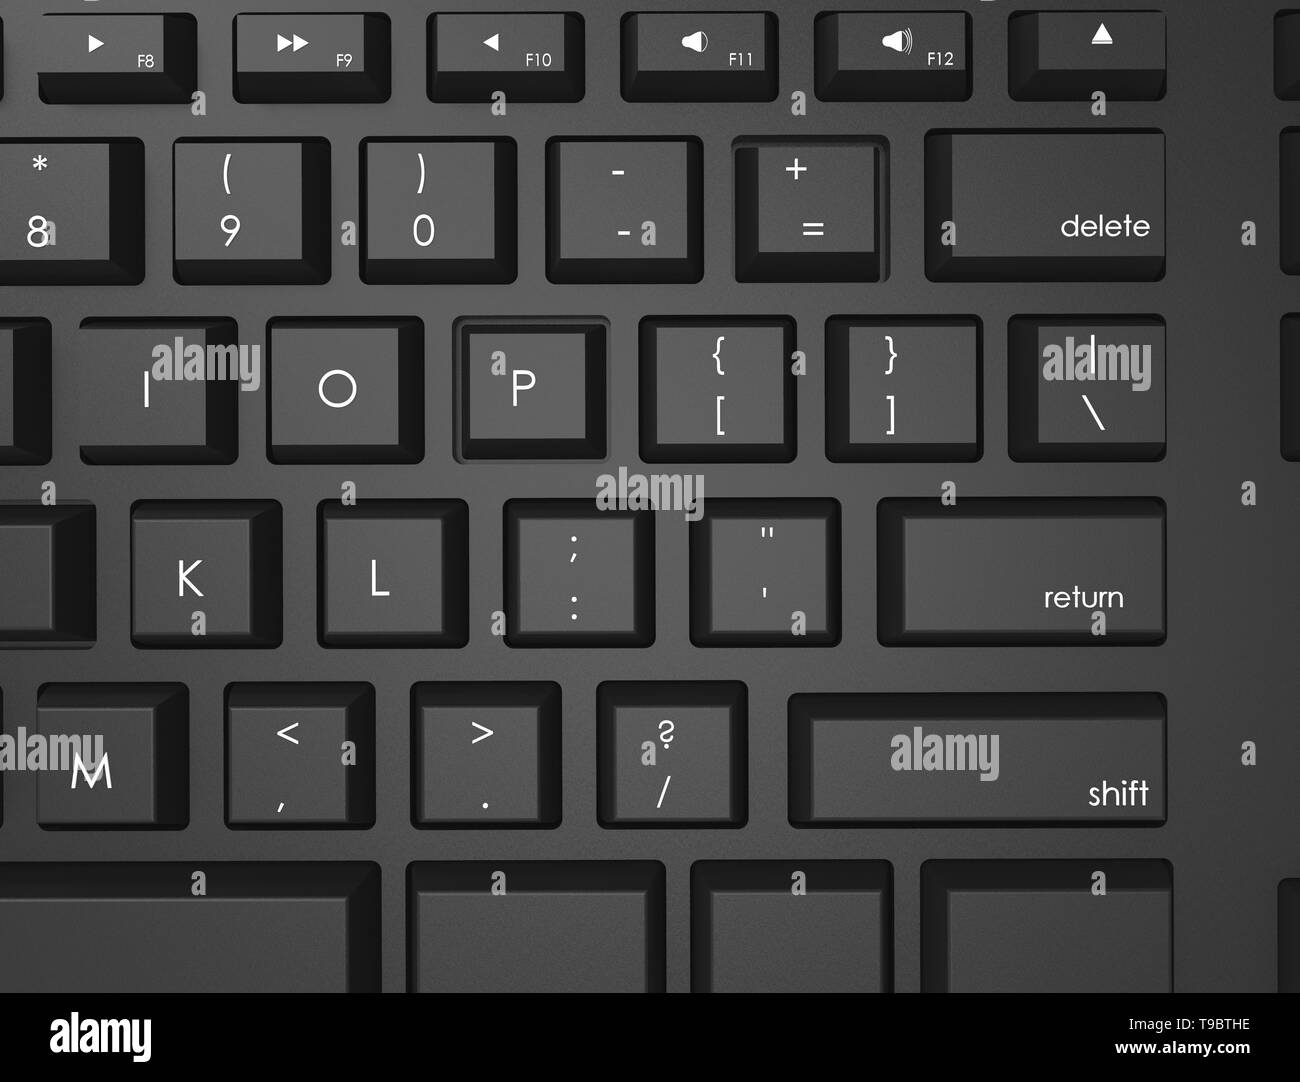 3D rendering illustration topview of a black Qwerty keyboard. Stock Photo